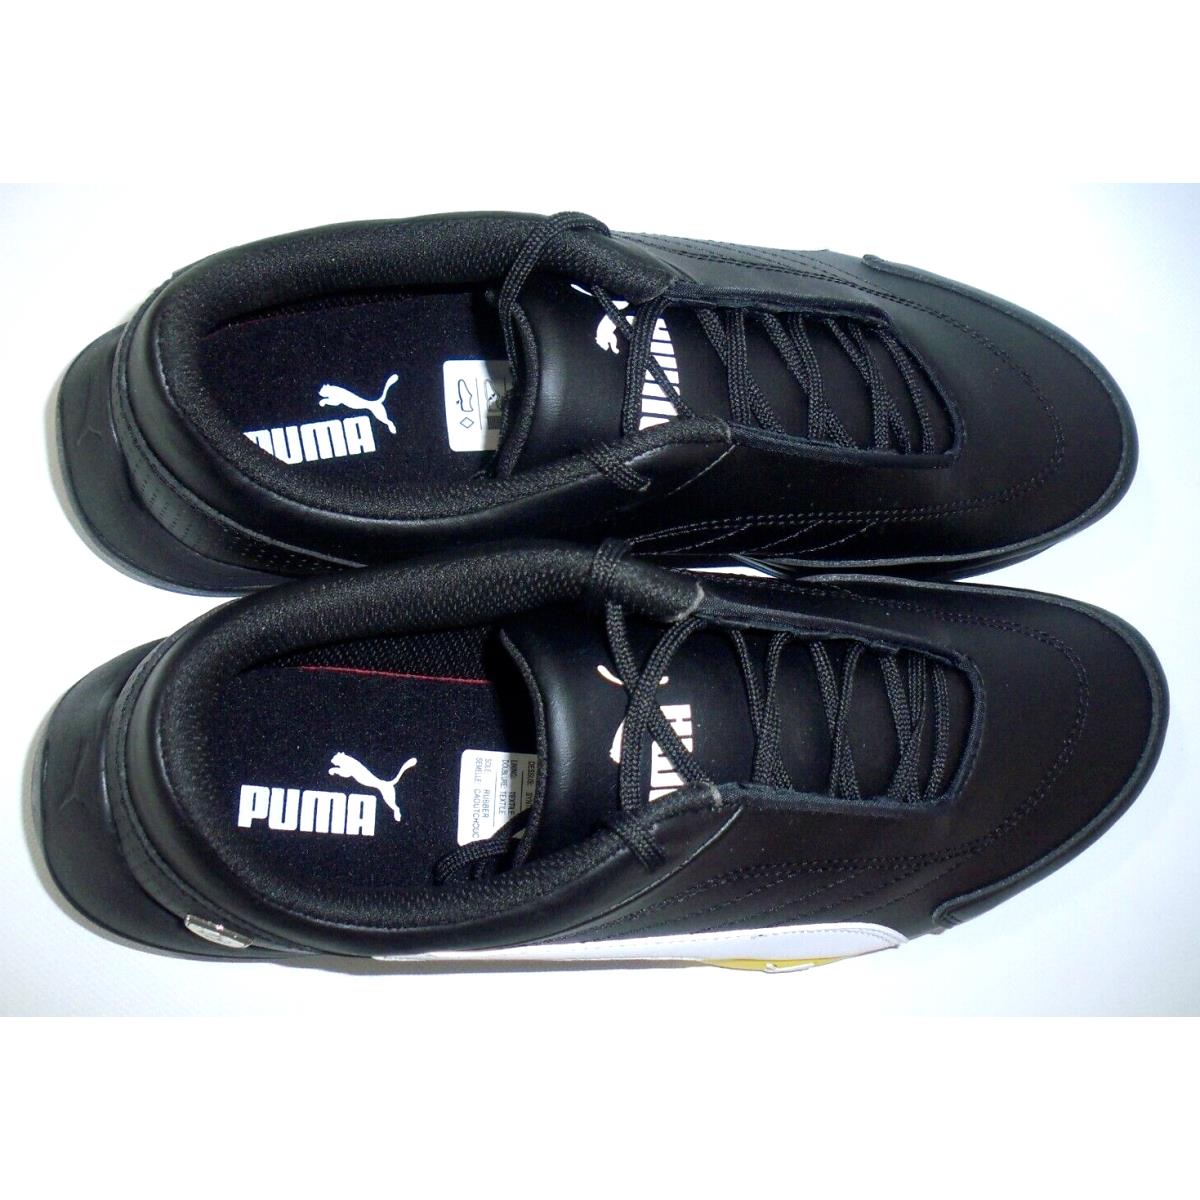 Puma shoes  - Black , Black, White, and Blazing Yellow Manufacturer 13